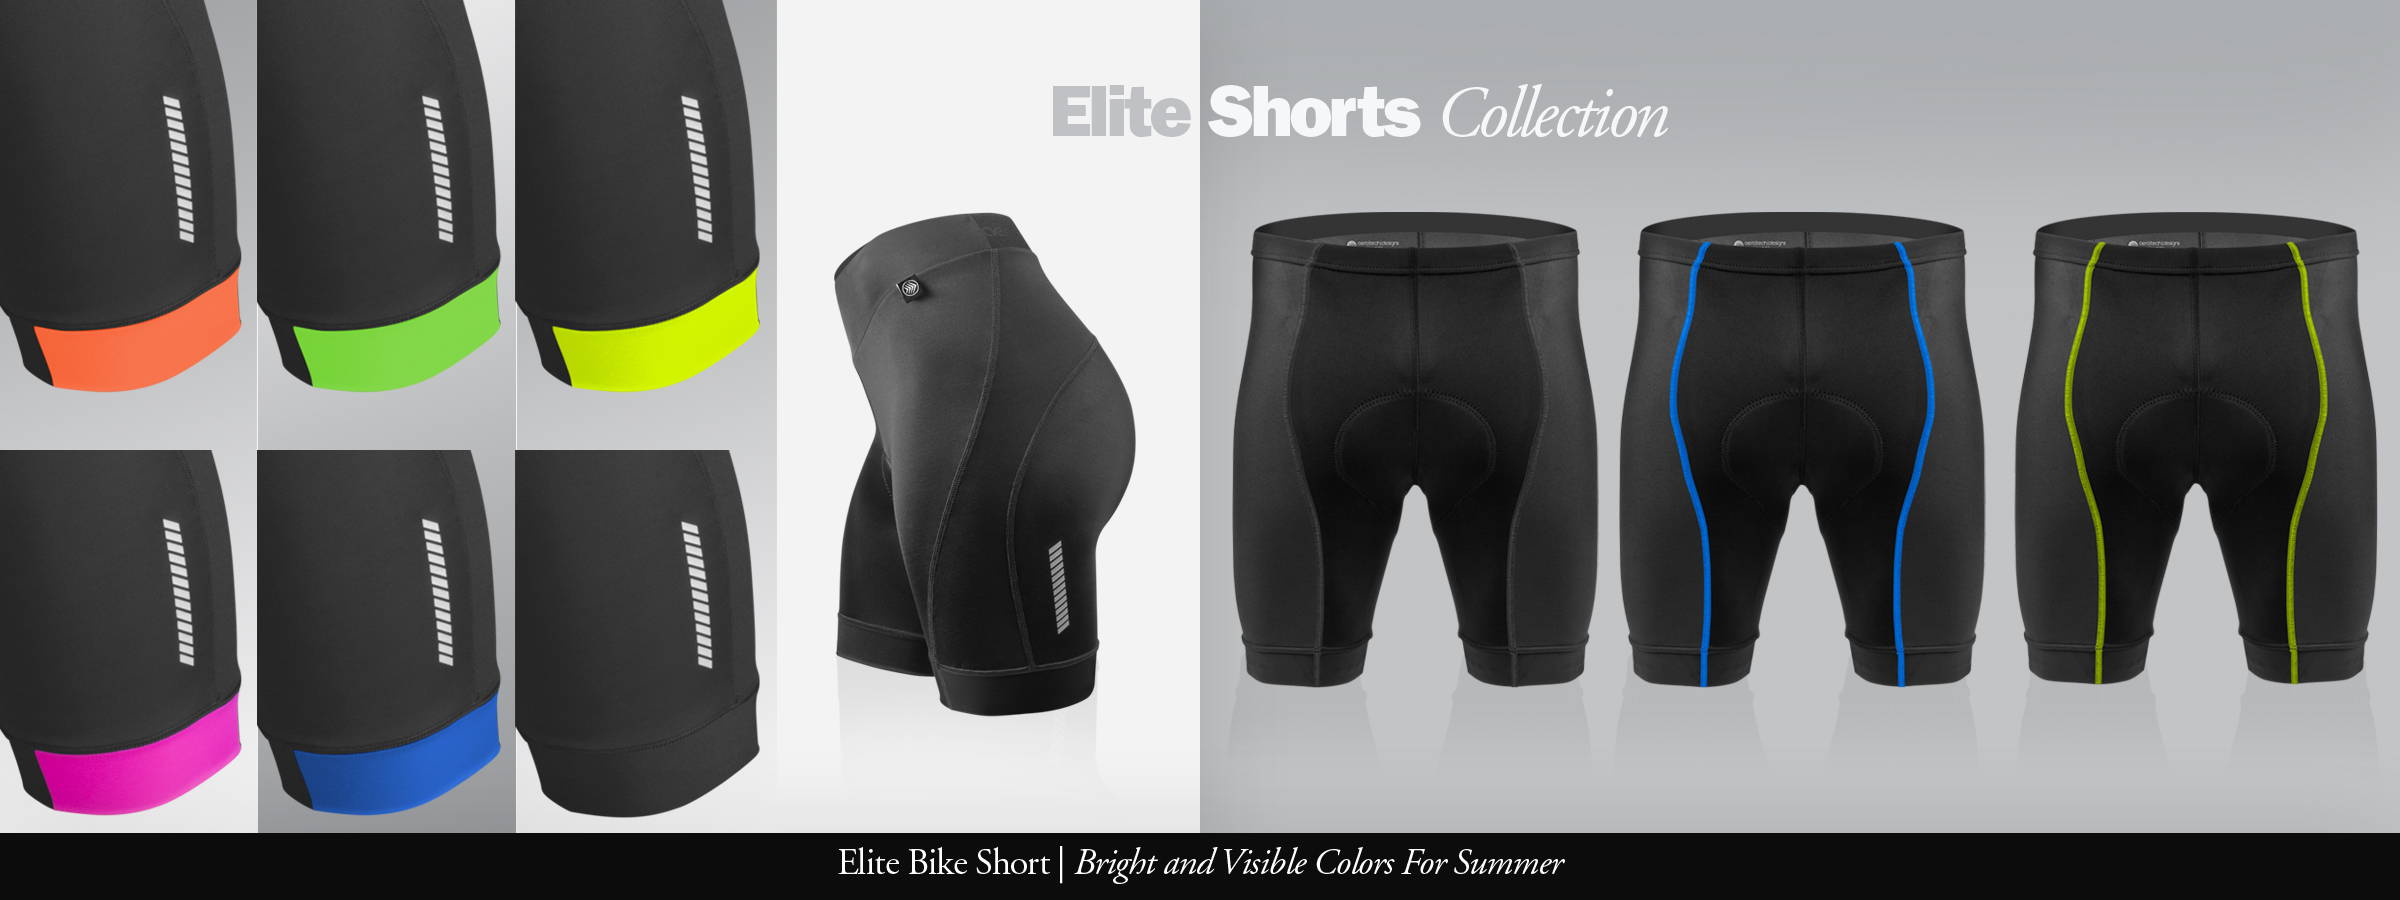 ATD Elite short new color options for men and women